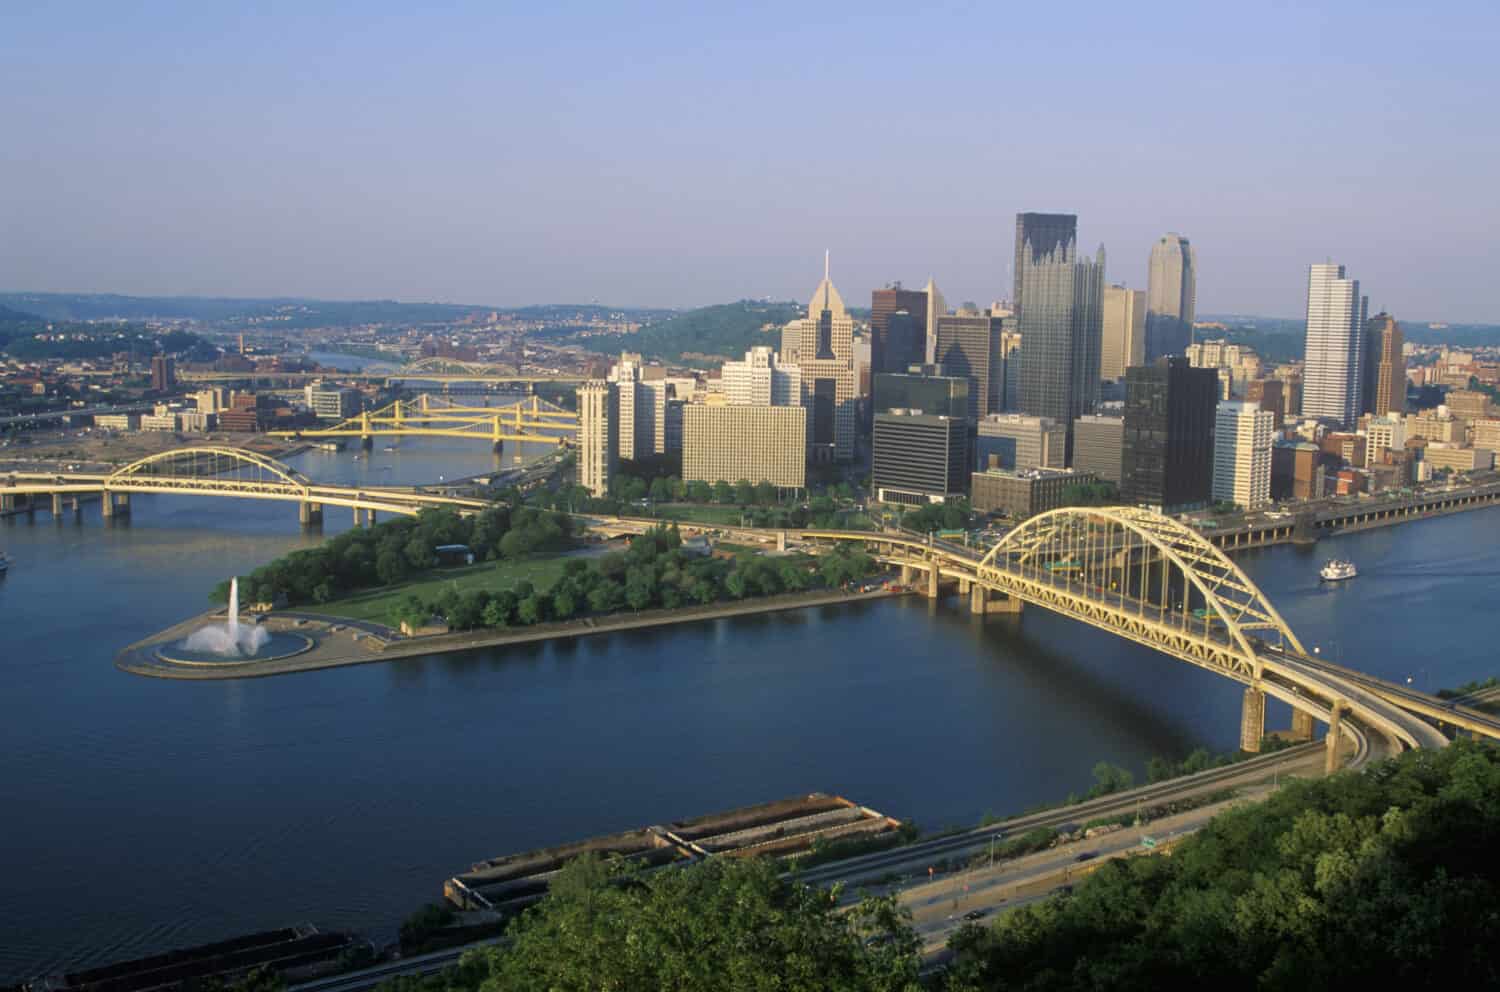 Fort Pitt Bridge over Allegheny River with Pittsburgh skyline, PA